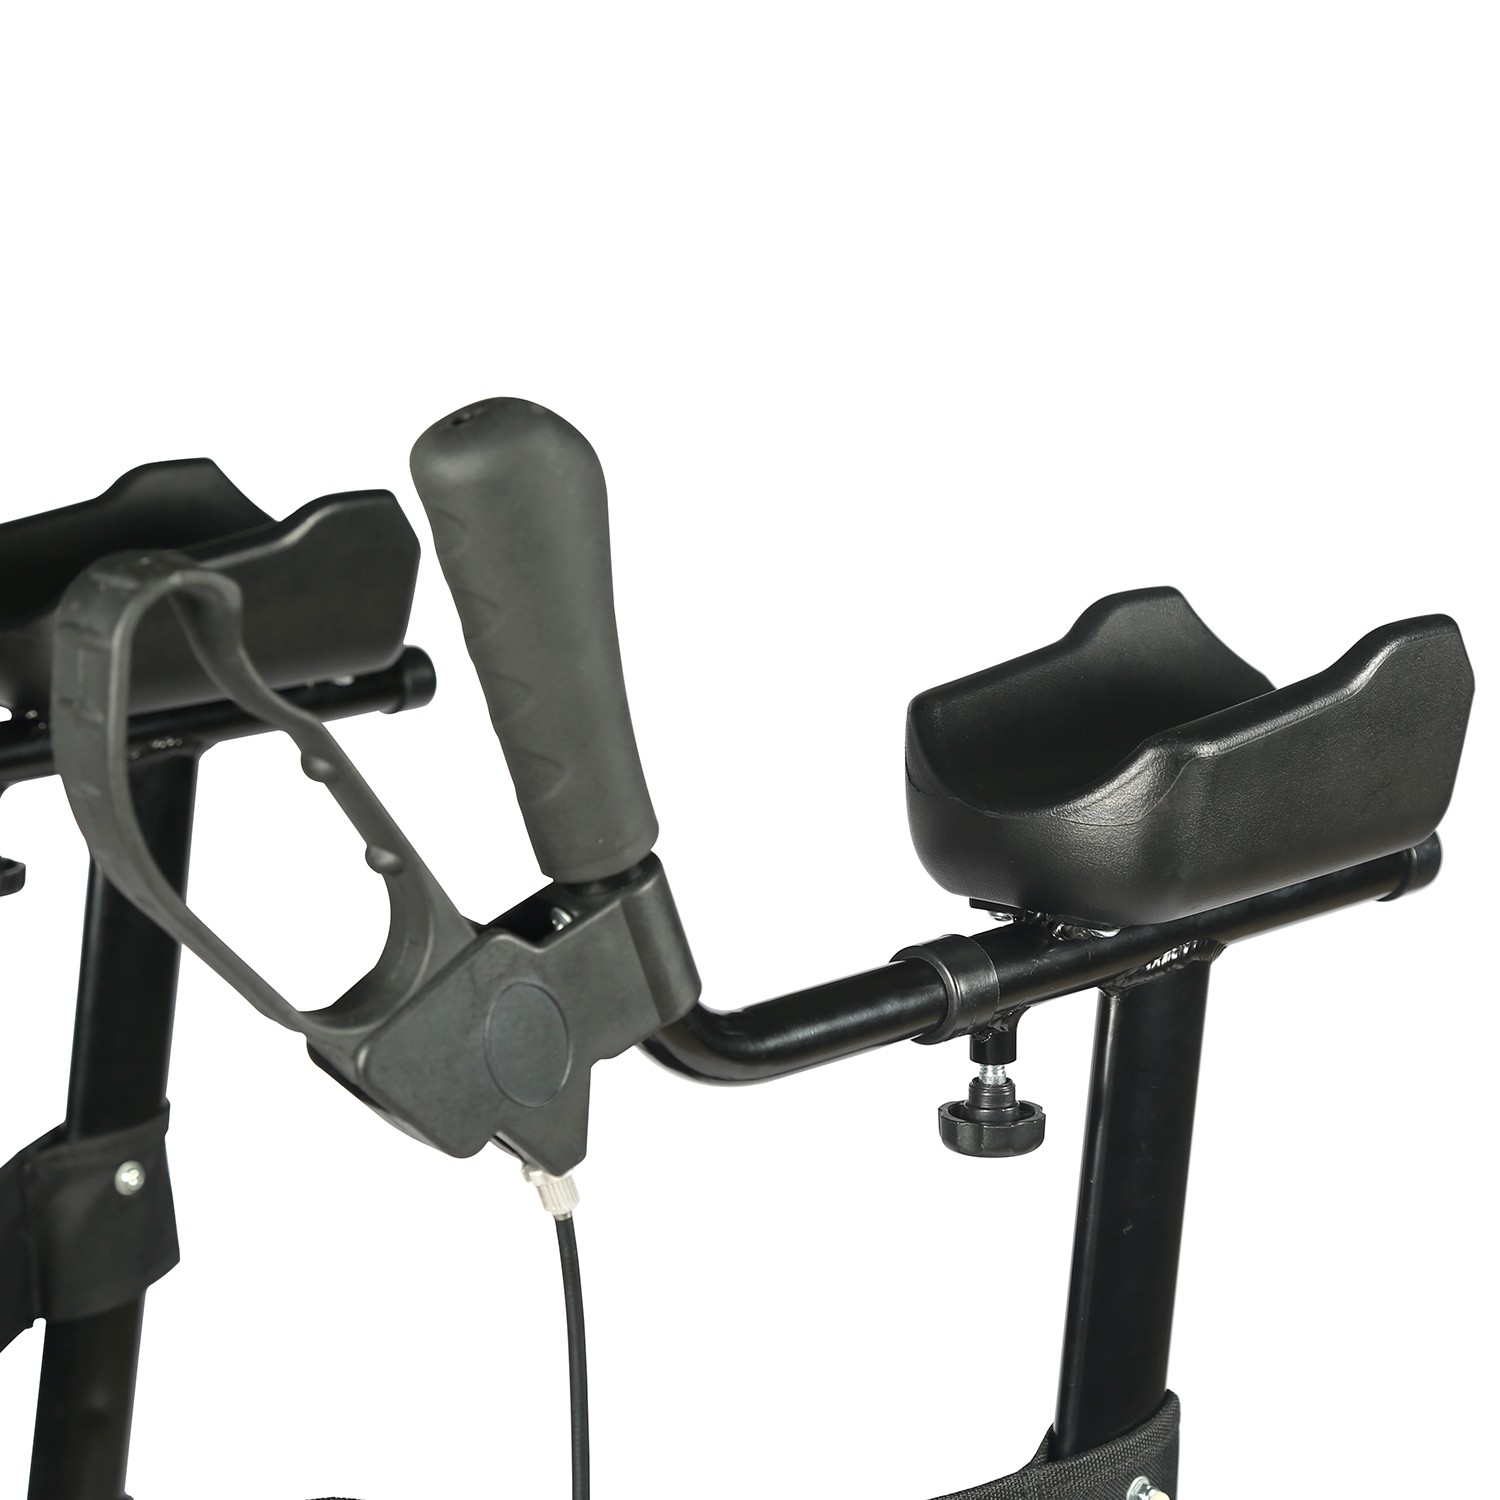 Upright Rollator Walker- Stand up Rollator Walker with Forearm Support for Elderly